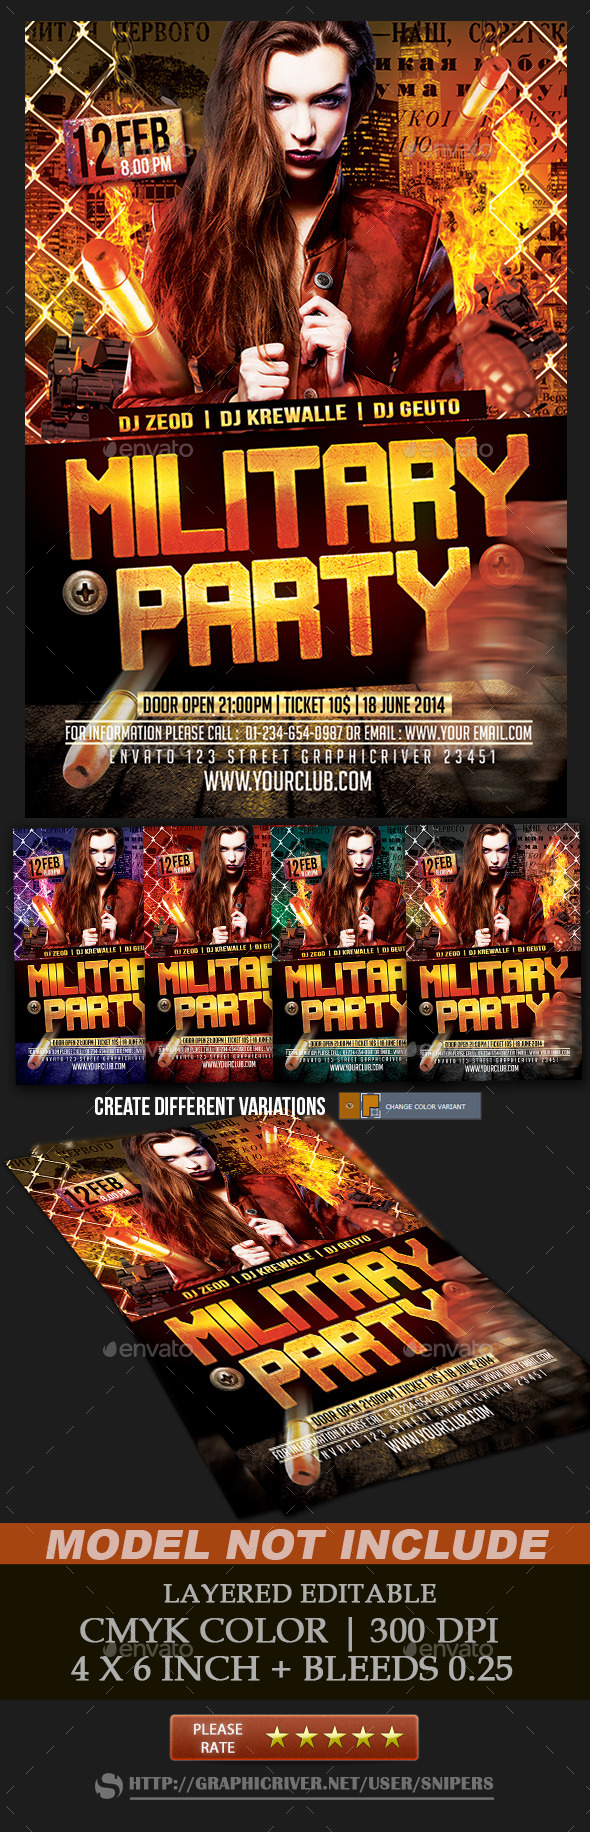 Military Party Flyer (Events)